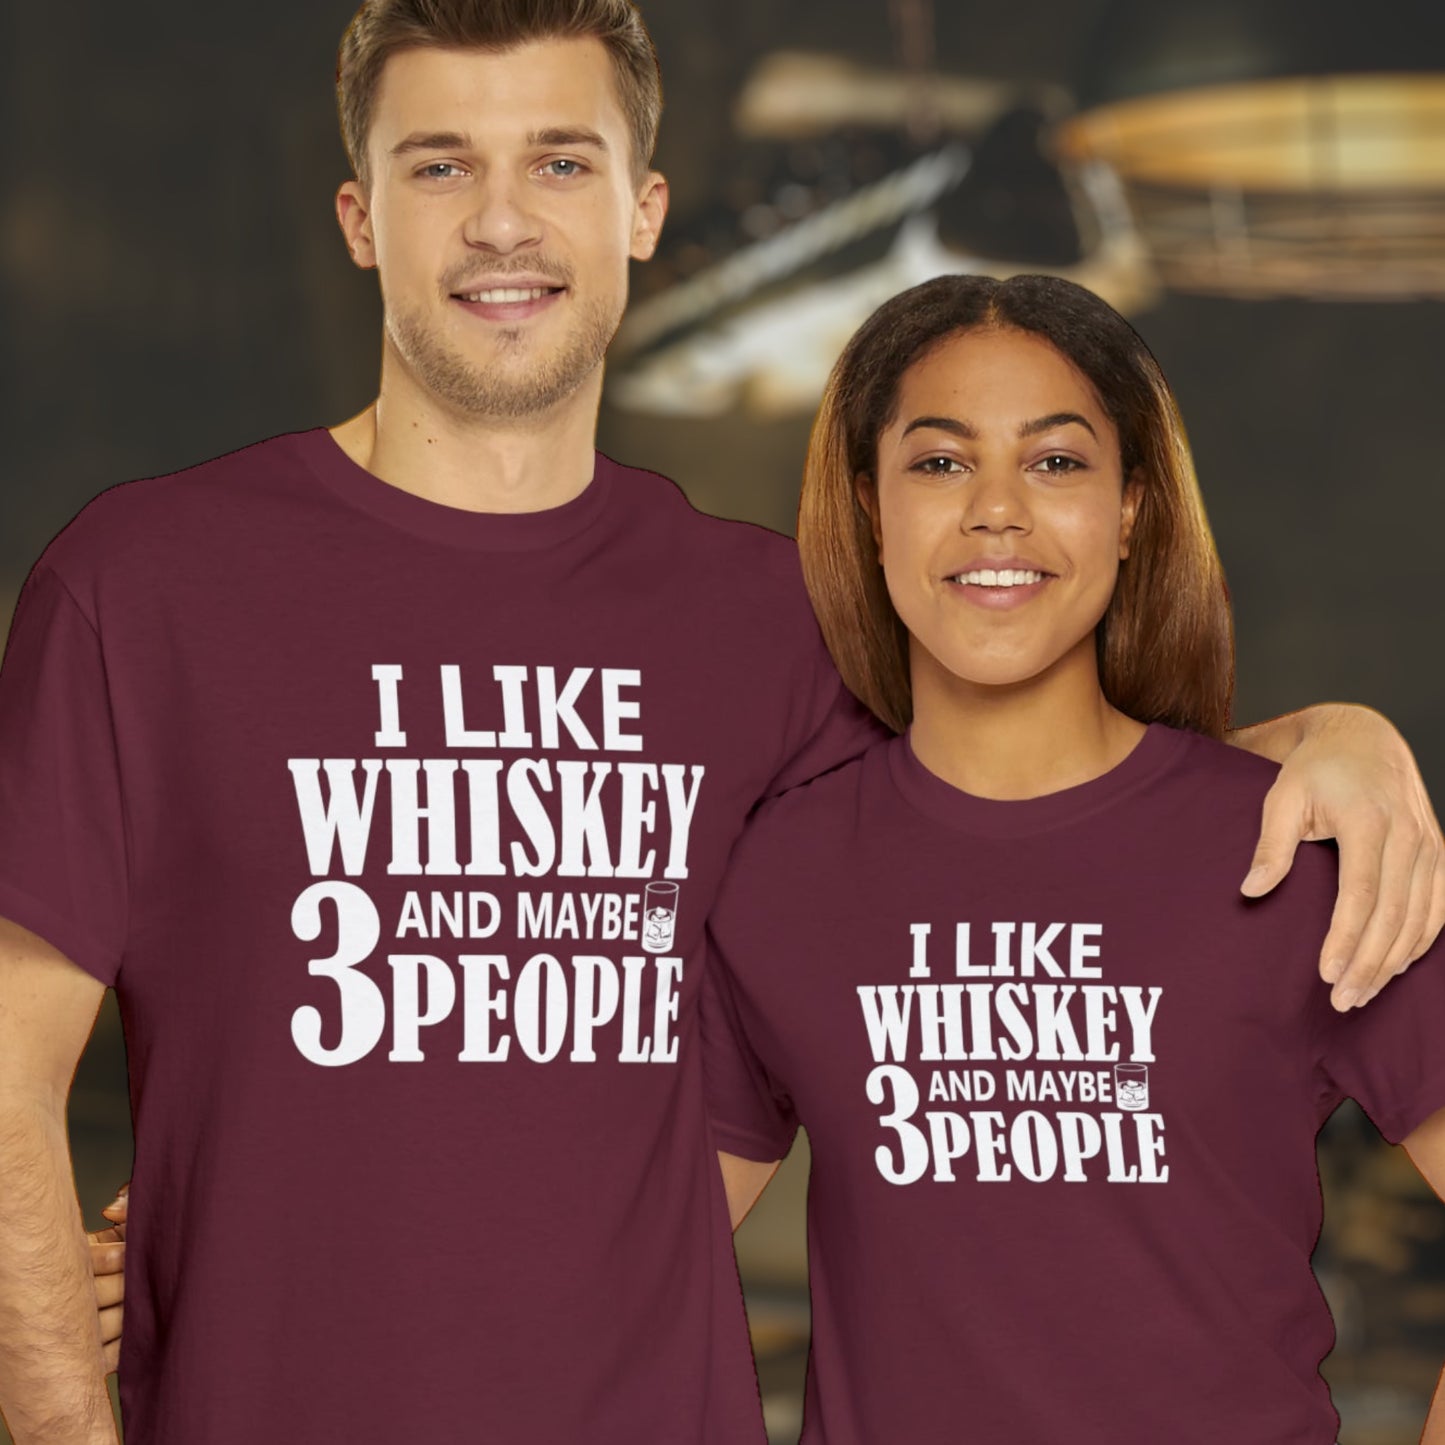 "I Like Whiskey and Maybe Like 3 People" cotton tee for casual wear.